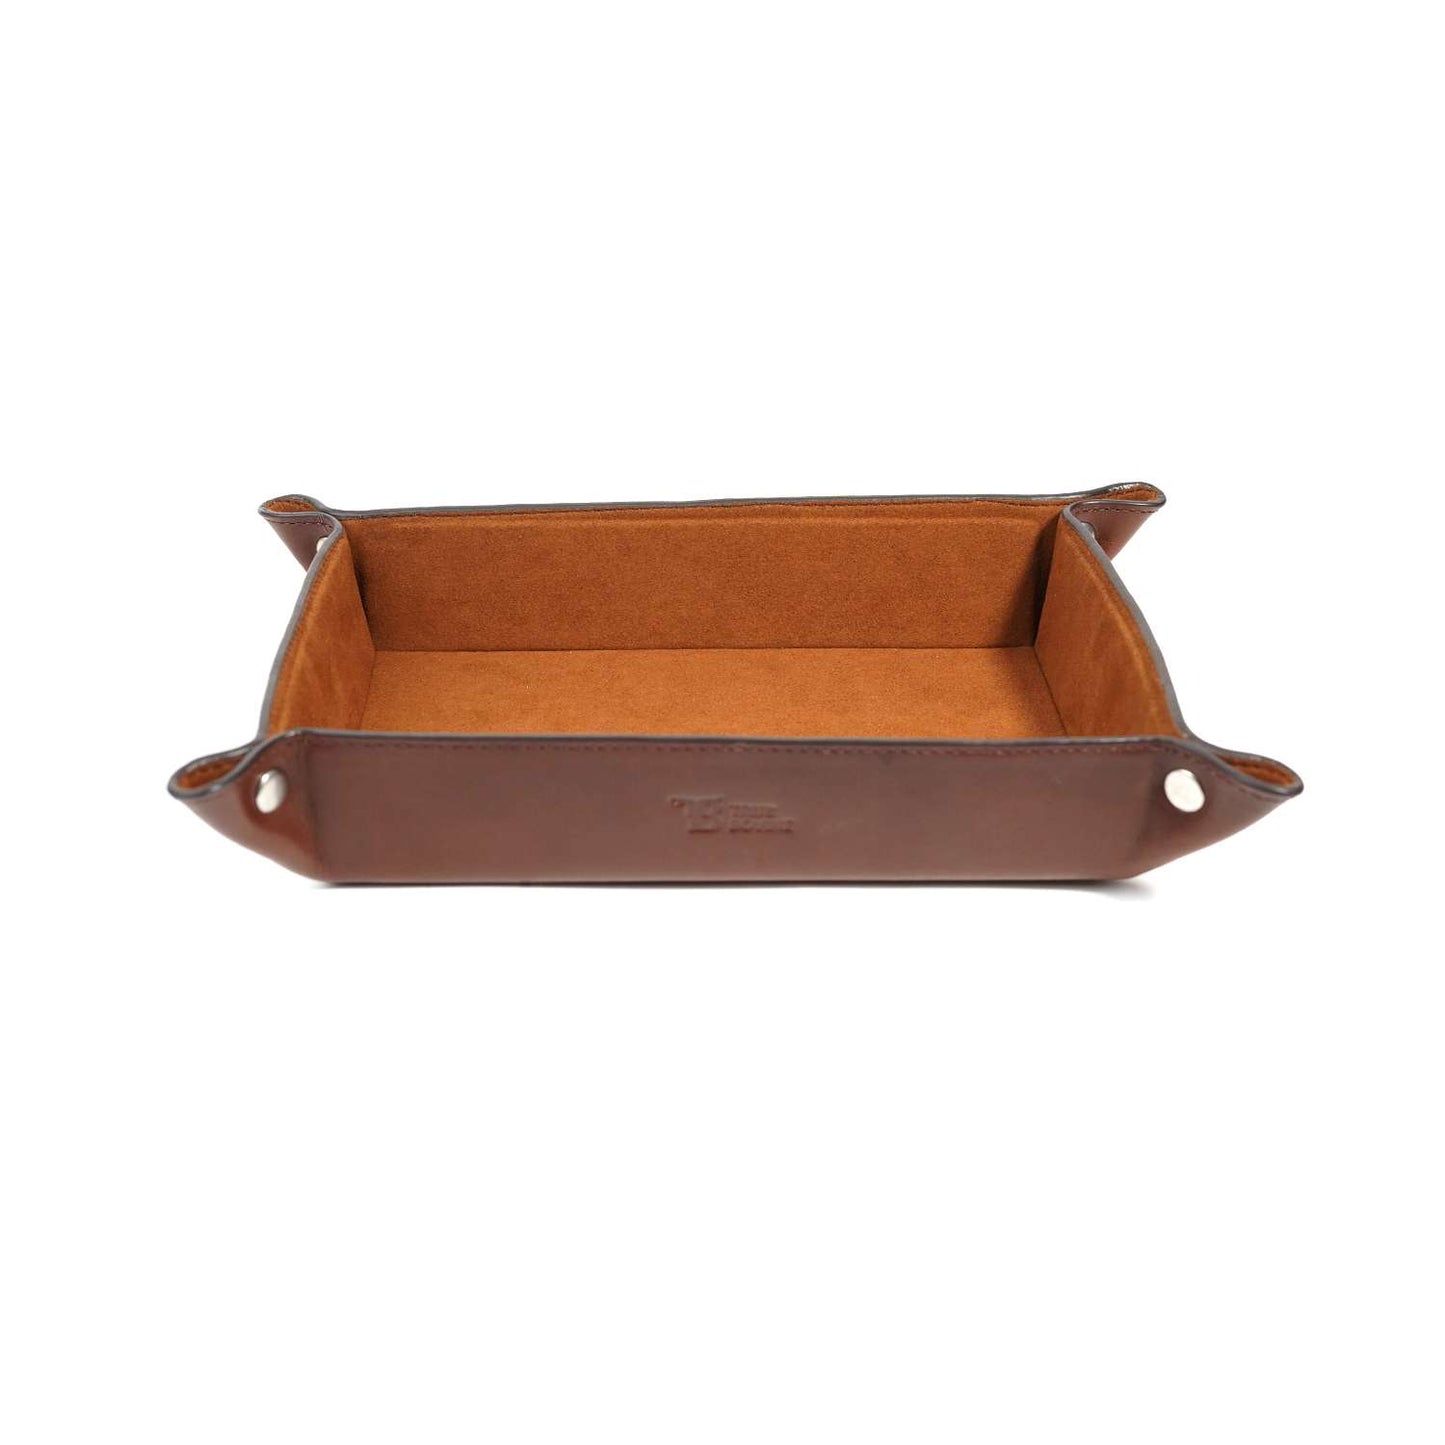 Classic Leather Tray